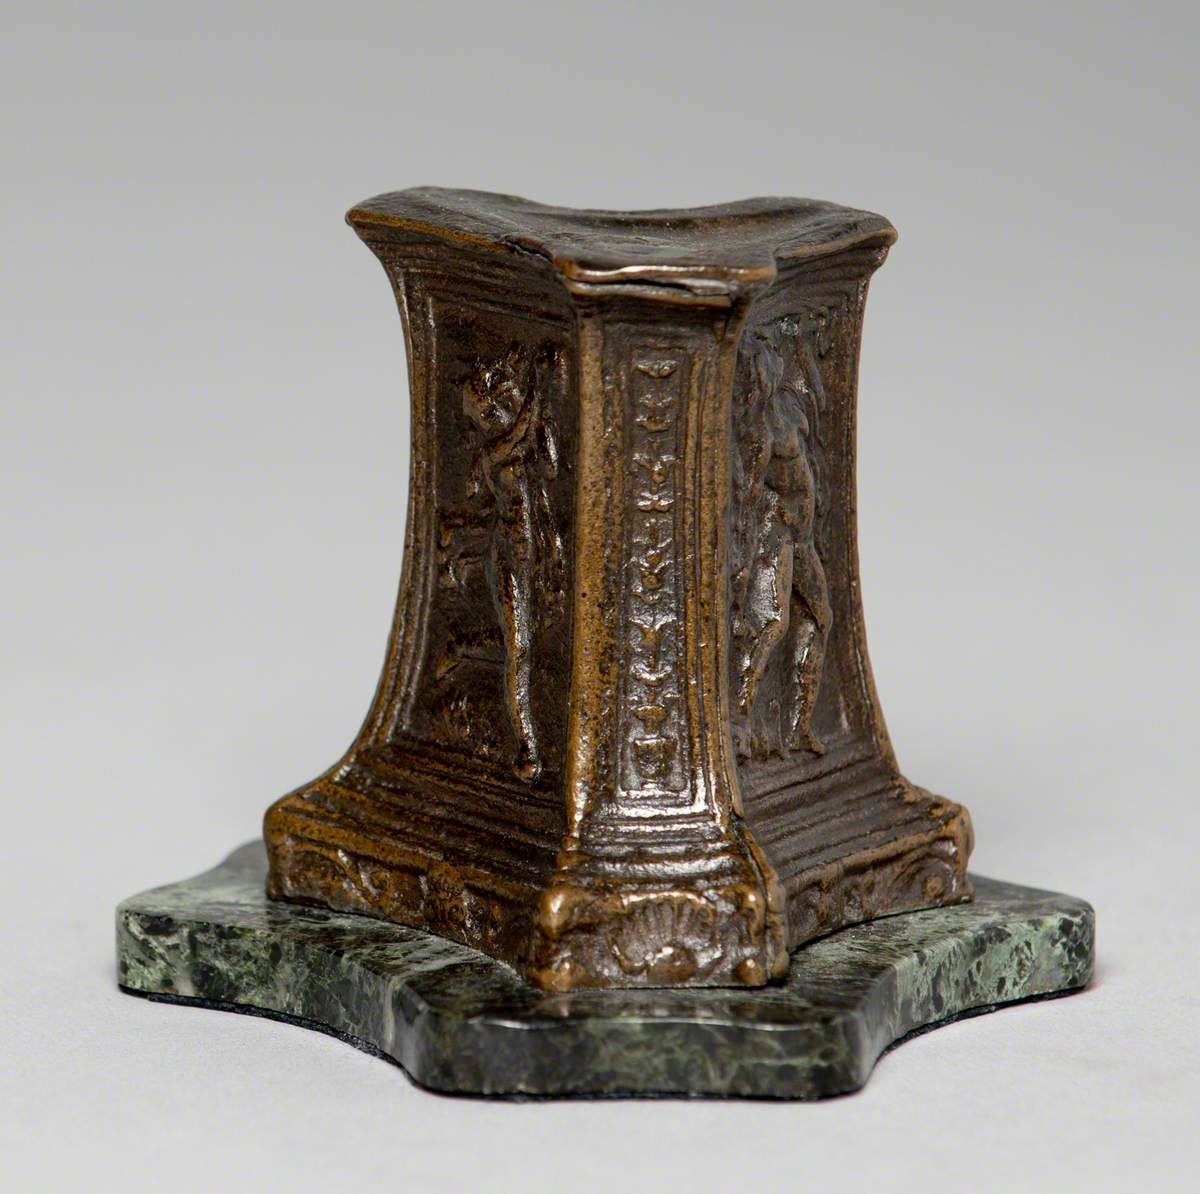 Pedestal with Bacchic Reliefs